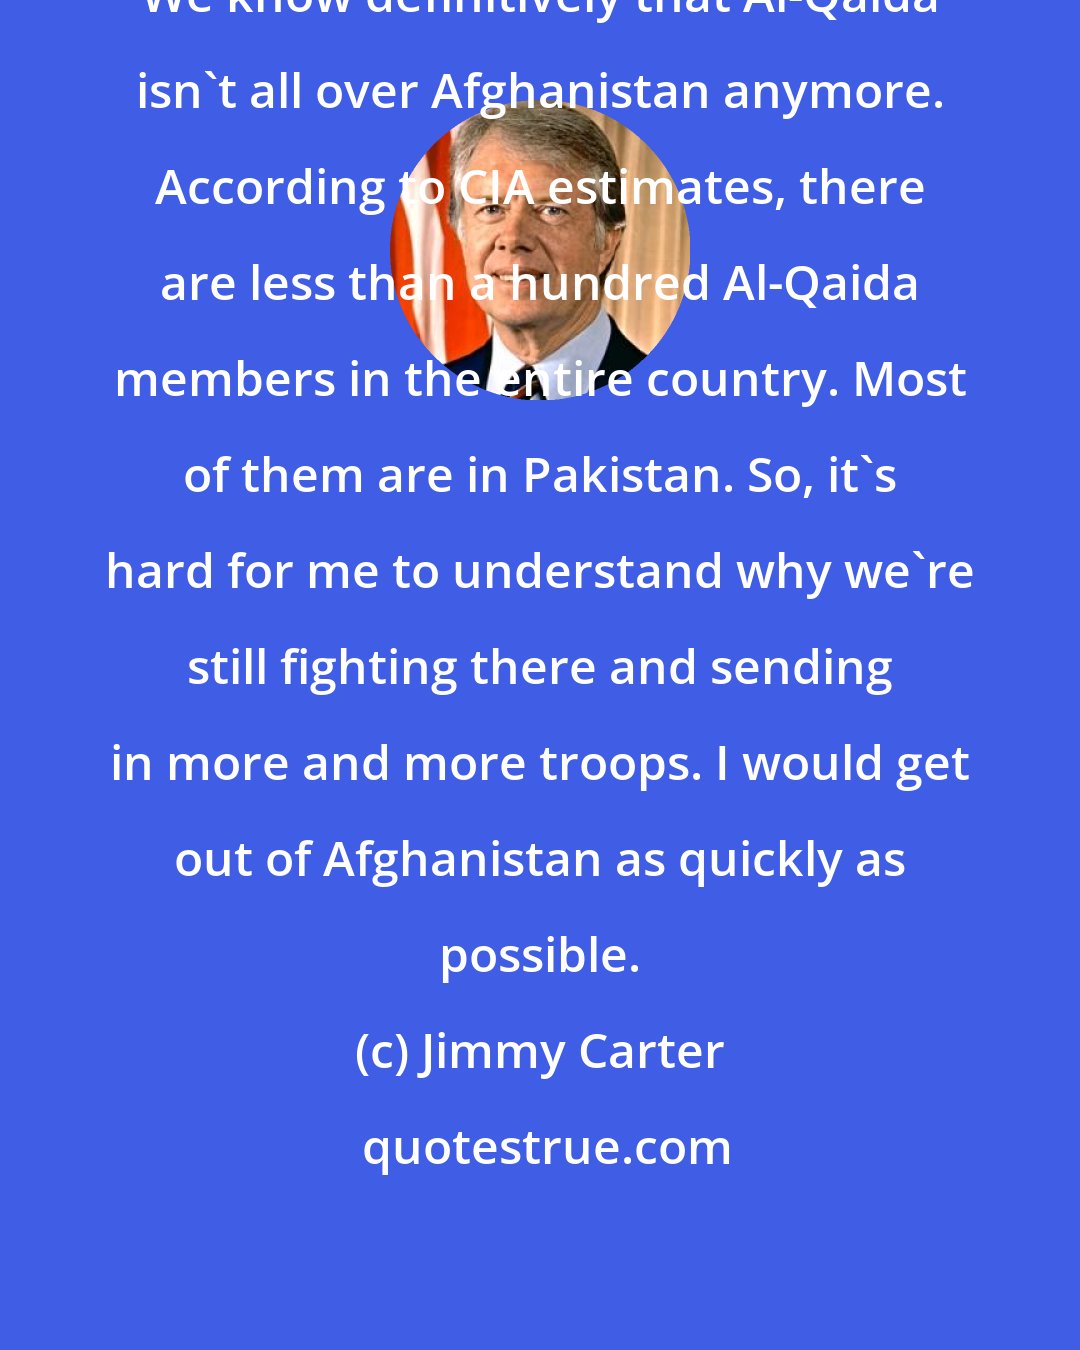 Jimmy Carter: We know definitively that Al-Qaida isn't all over Afghanistan anymore. According to CIA estimates, there are less than a hundred Al-Qaida members in the entire country. Most of them are in Pakistan. So, it's hard for me to understand why we're still fighting there and sending in more and more troops. I would get out of Afghanistan as quickly as possible.